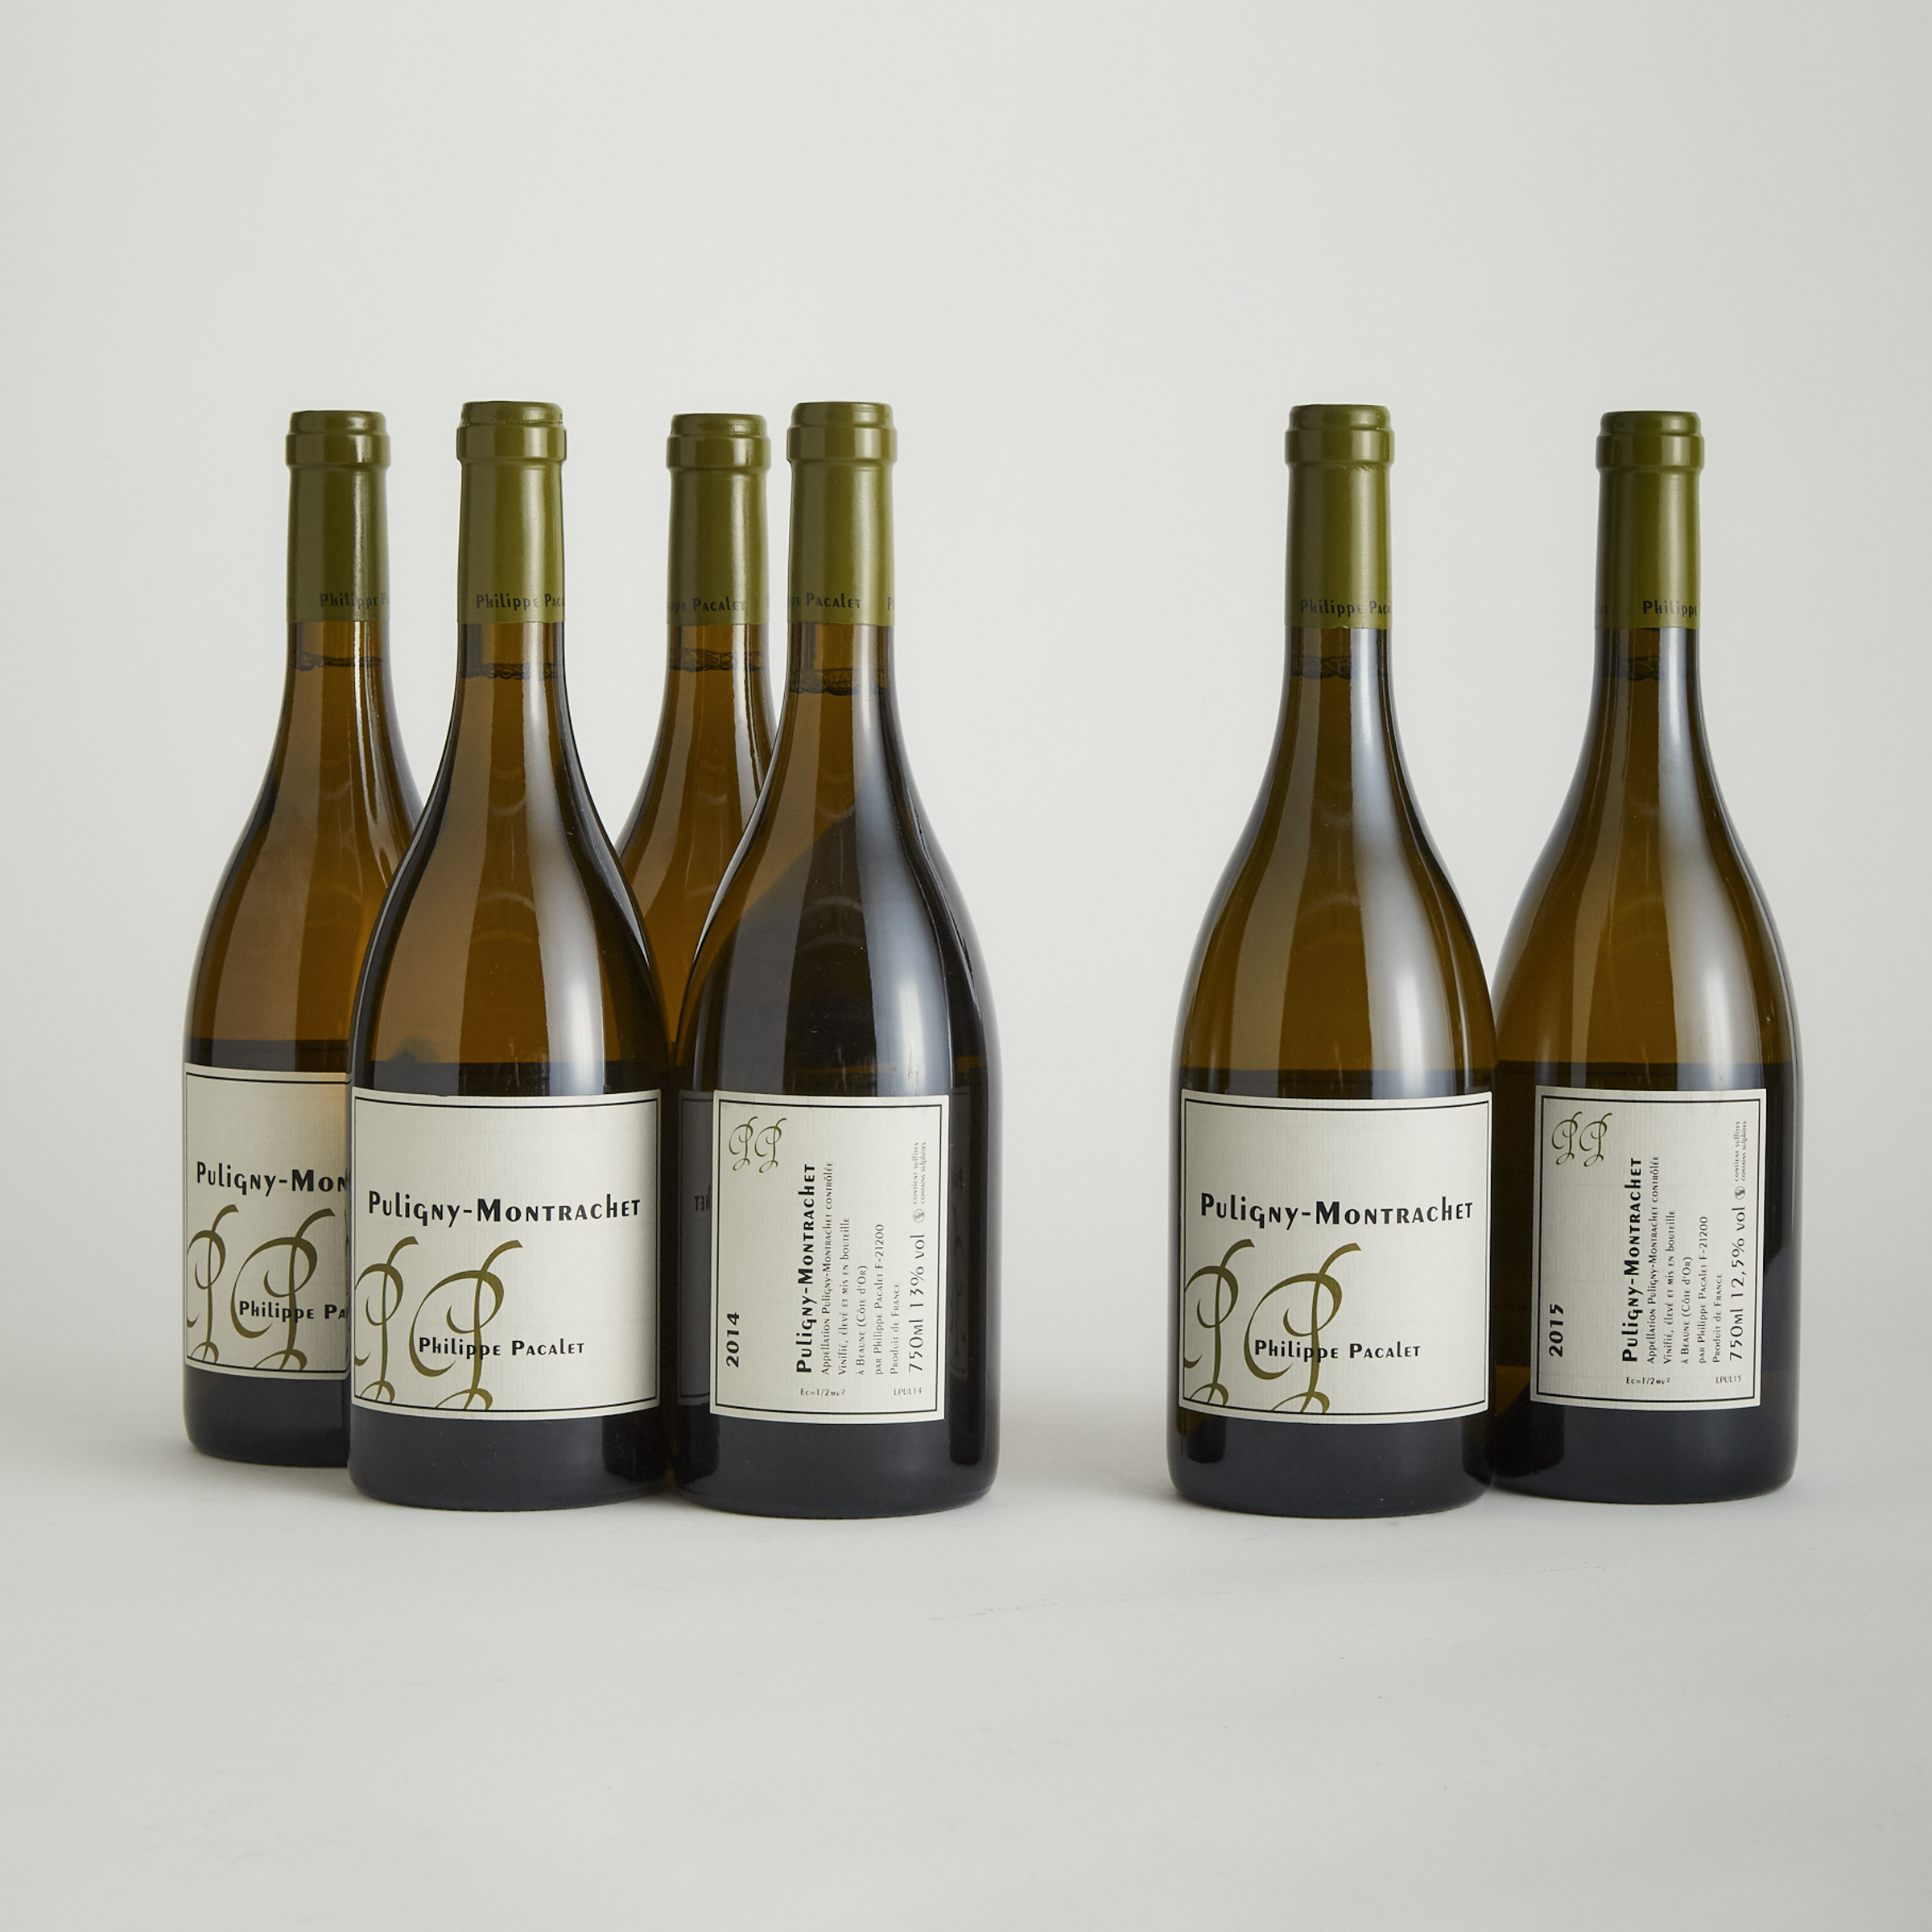 PHILIPPE PACALET PULIGNY MONTRACHET 2014 (4)
PHILIPPE PACALET PULIGNY MONTRACHET 2015 (2)